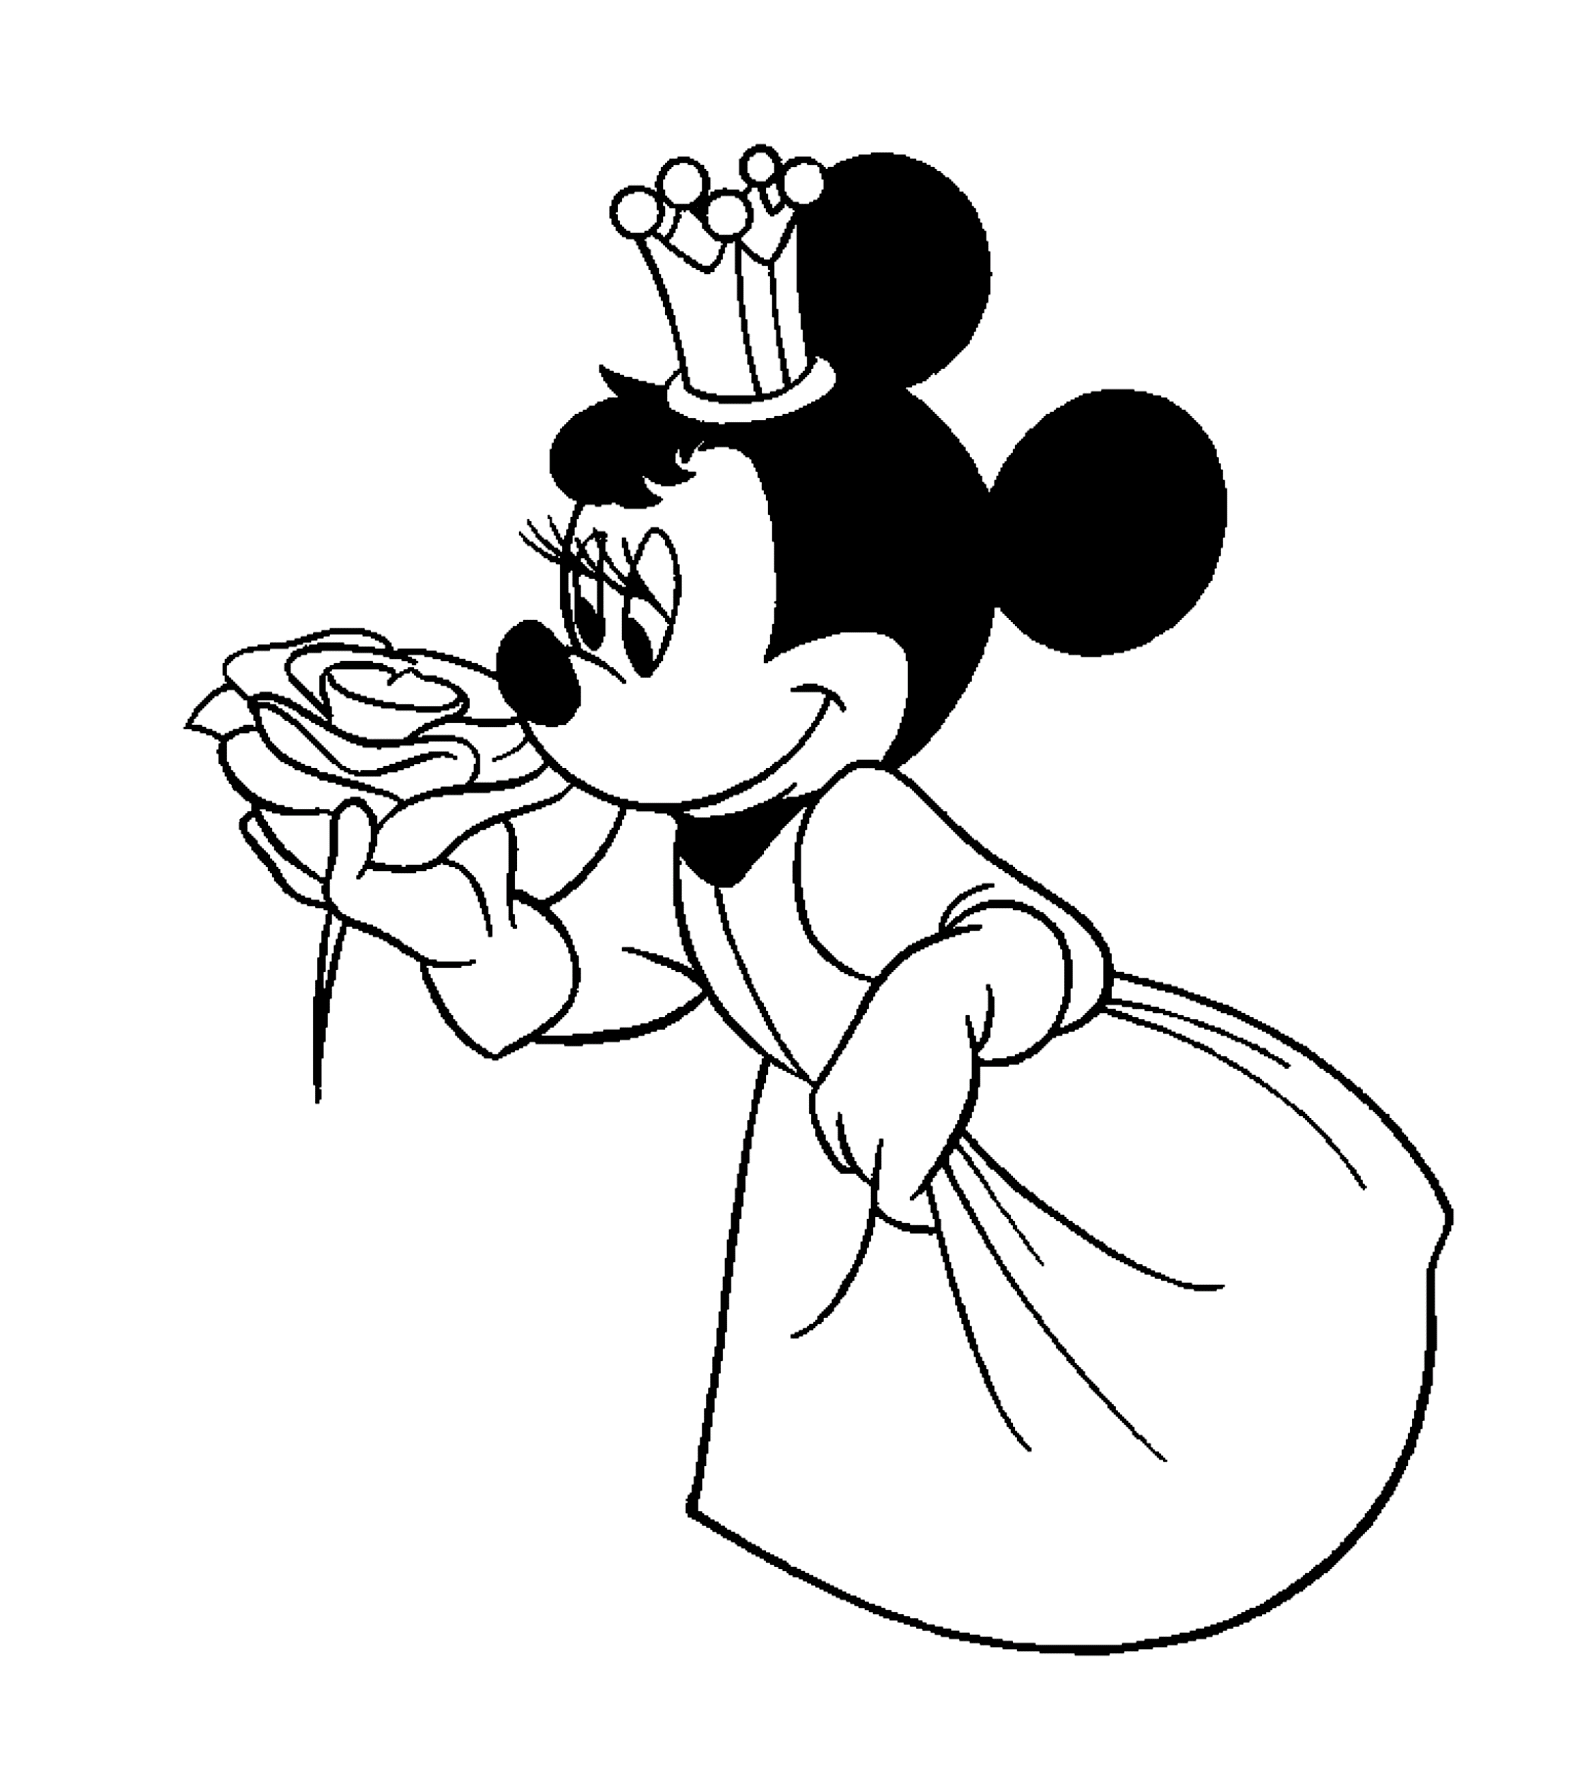 Minnie to download - Minnie Kids Coloring Pages